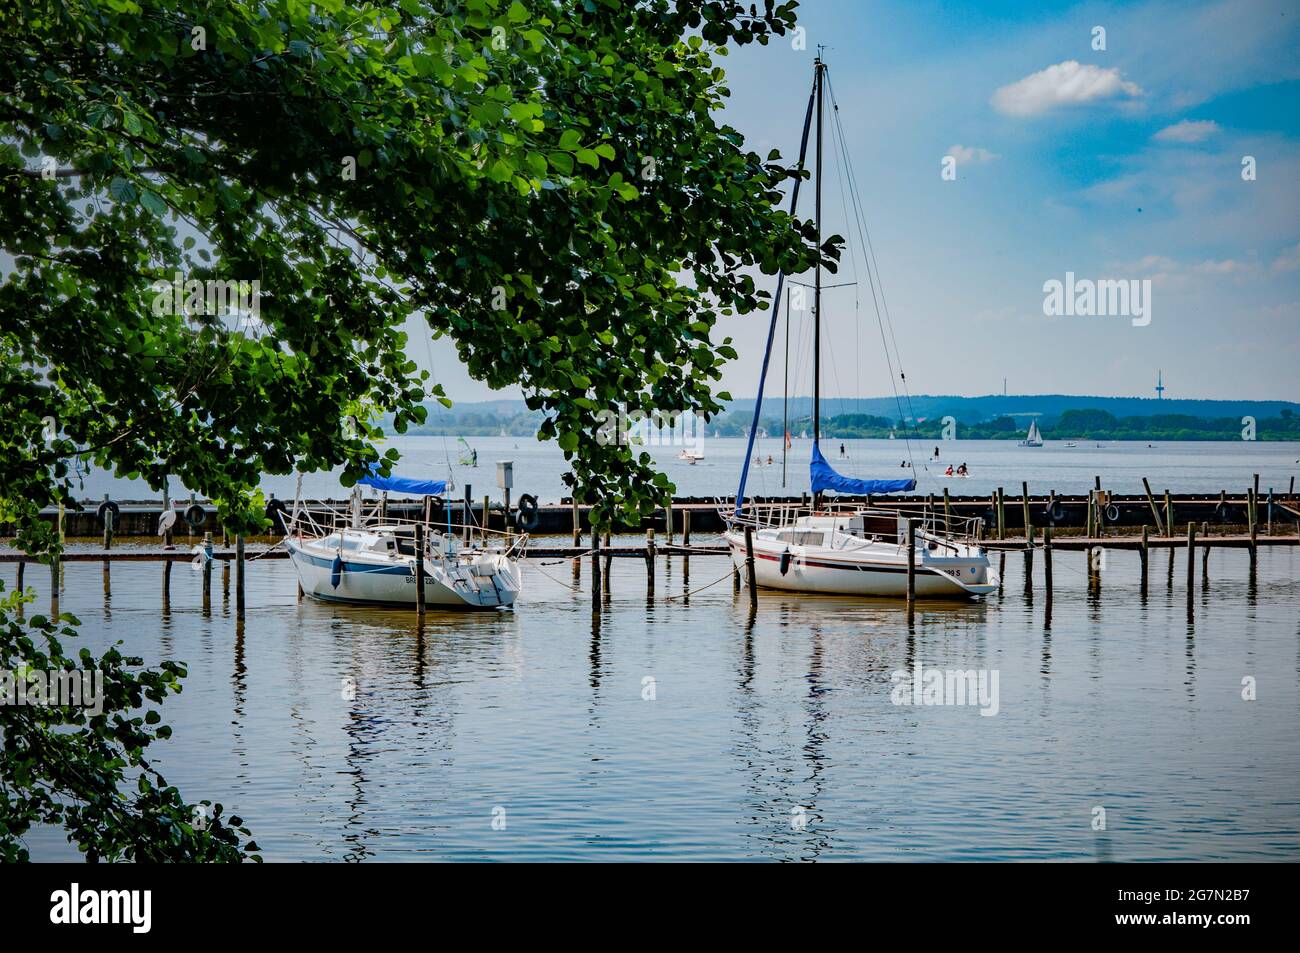 BOHMTE, GERMANY. JUNE 27, 2021 Dammer Natural Park. Lake view, boats, yachts, pier people resting on the beach Stock Photo